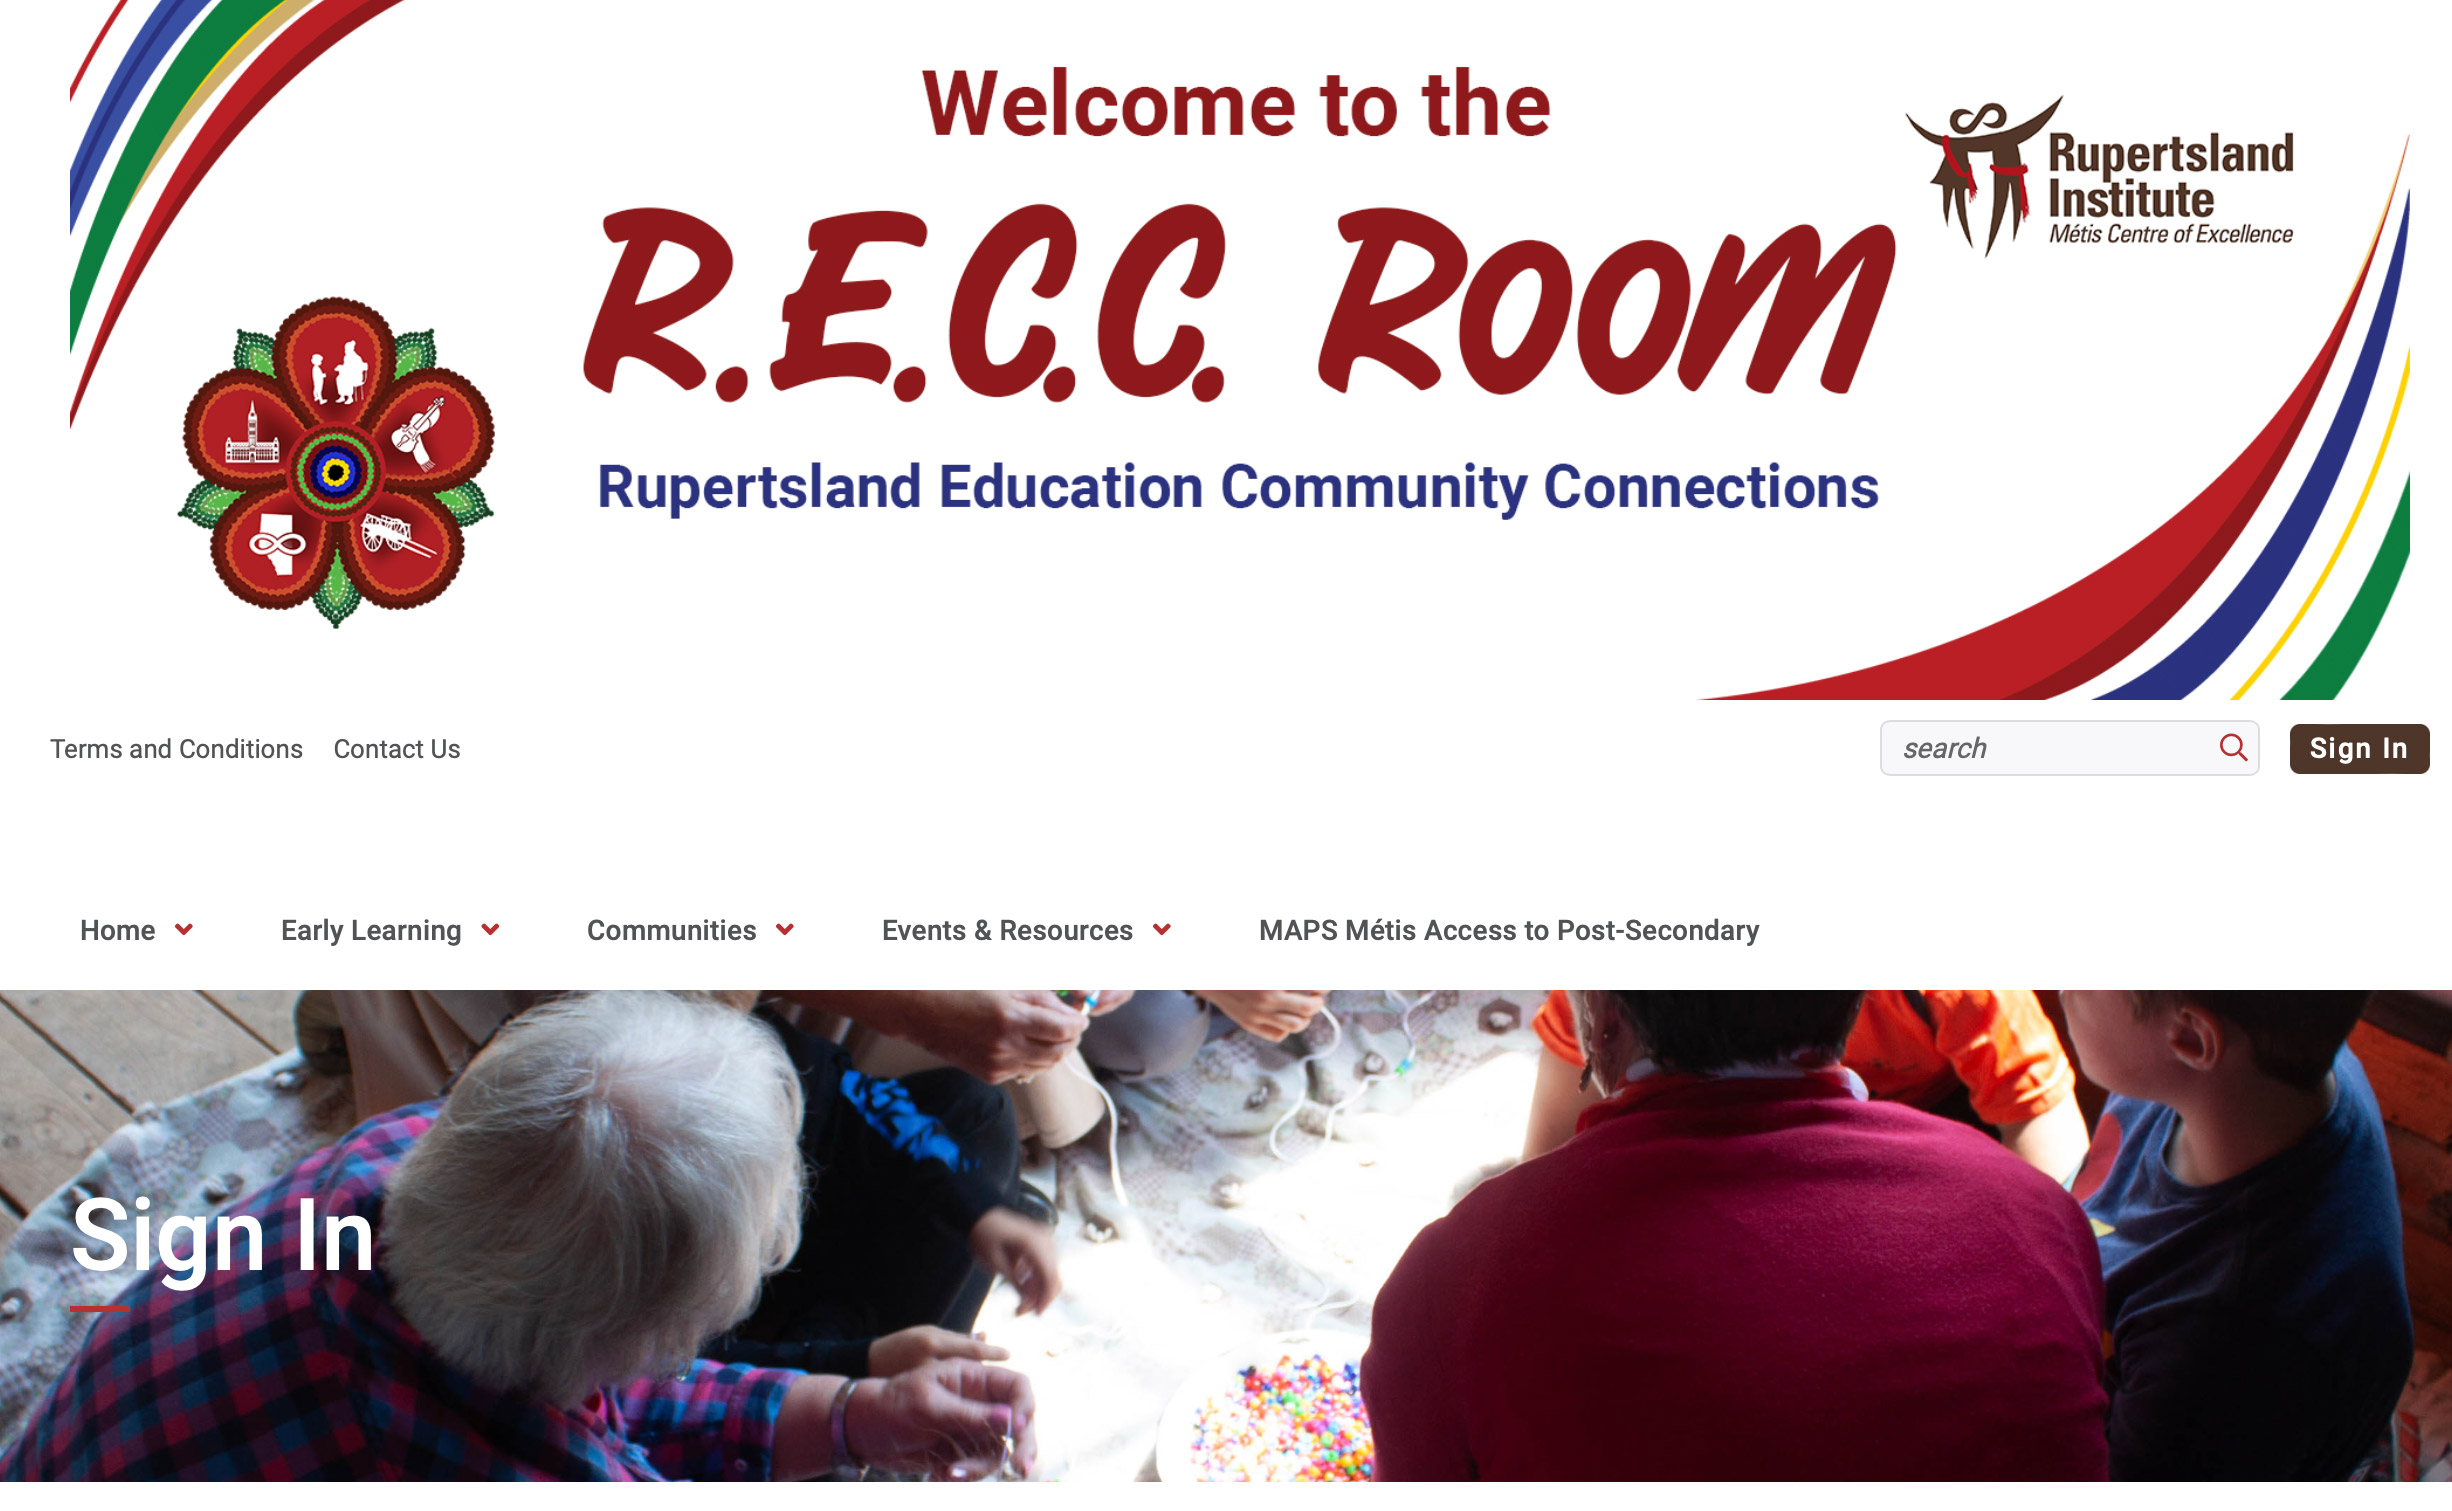 Early Learning - R.E.C.C. Room